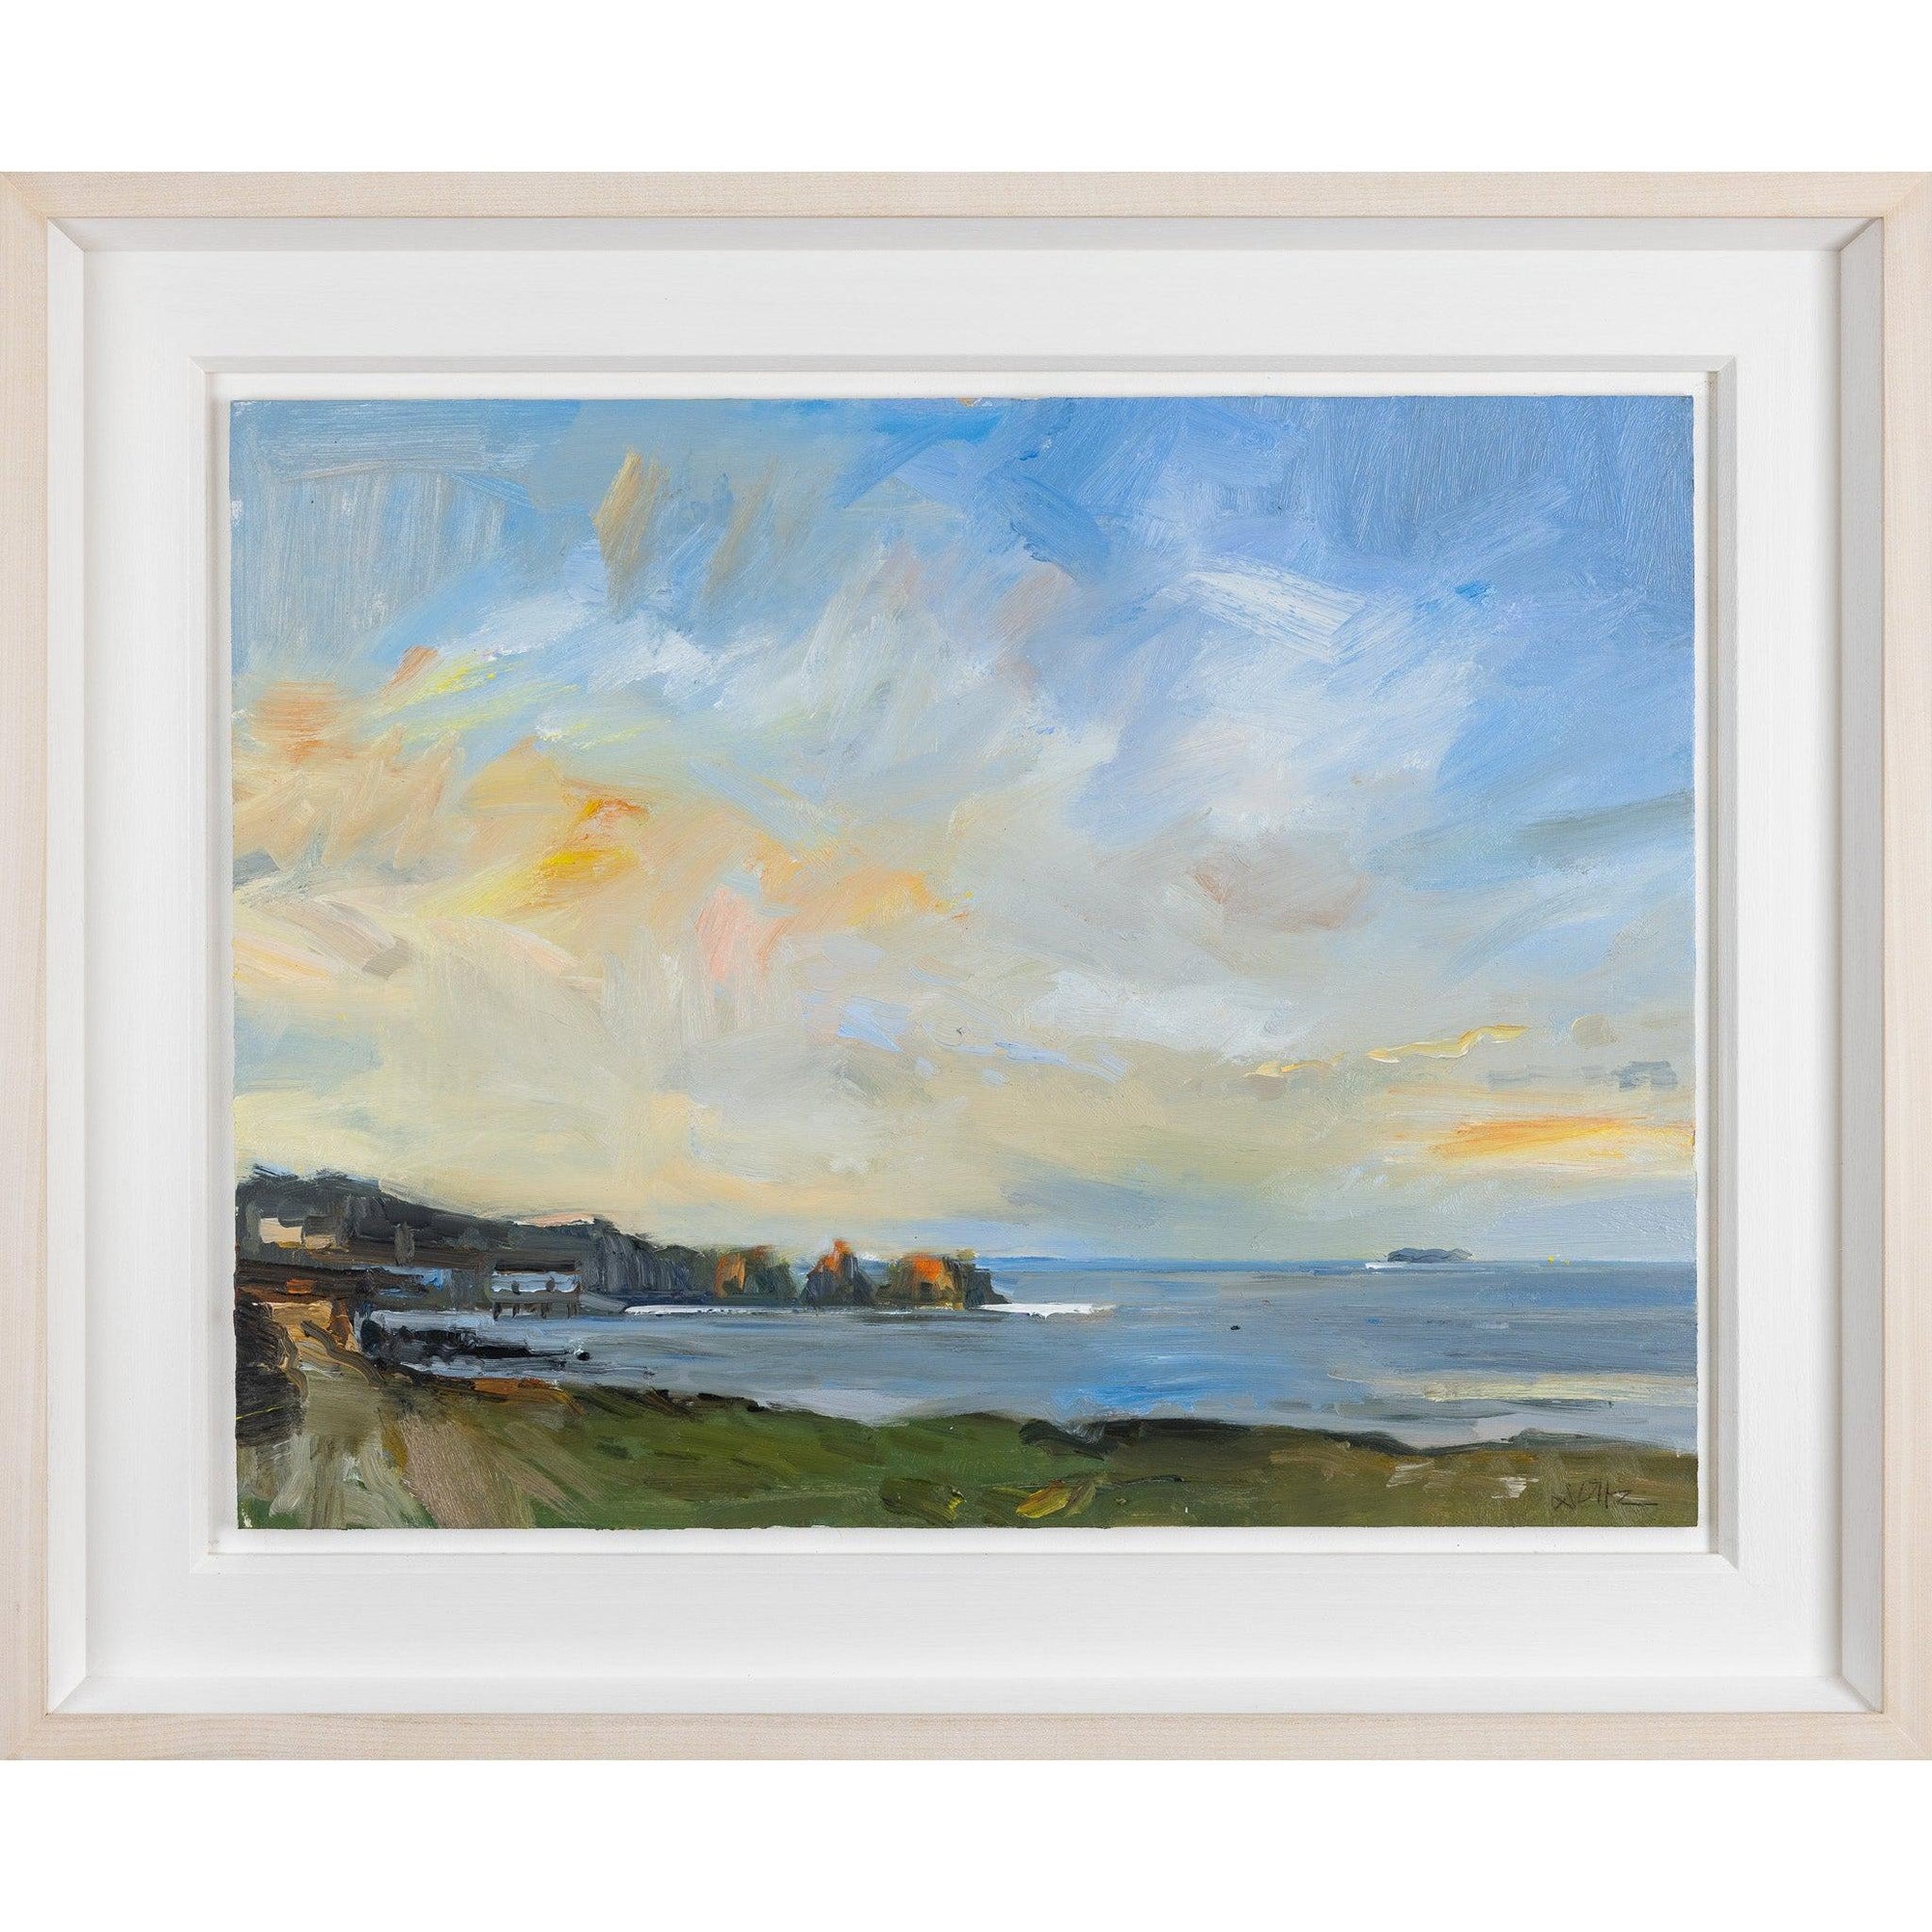 'Sunset, Mother Ivey's Bay' oil on board original by David Atkins, available at Padstow Gallery, Cornwall